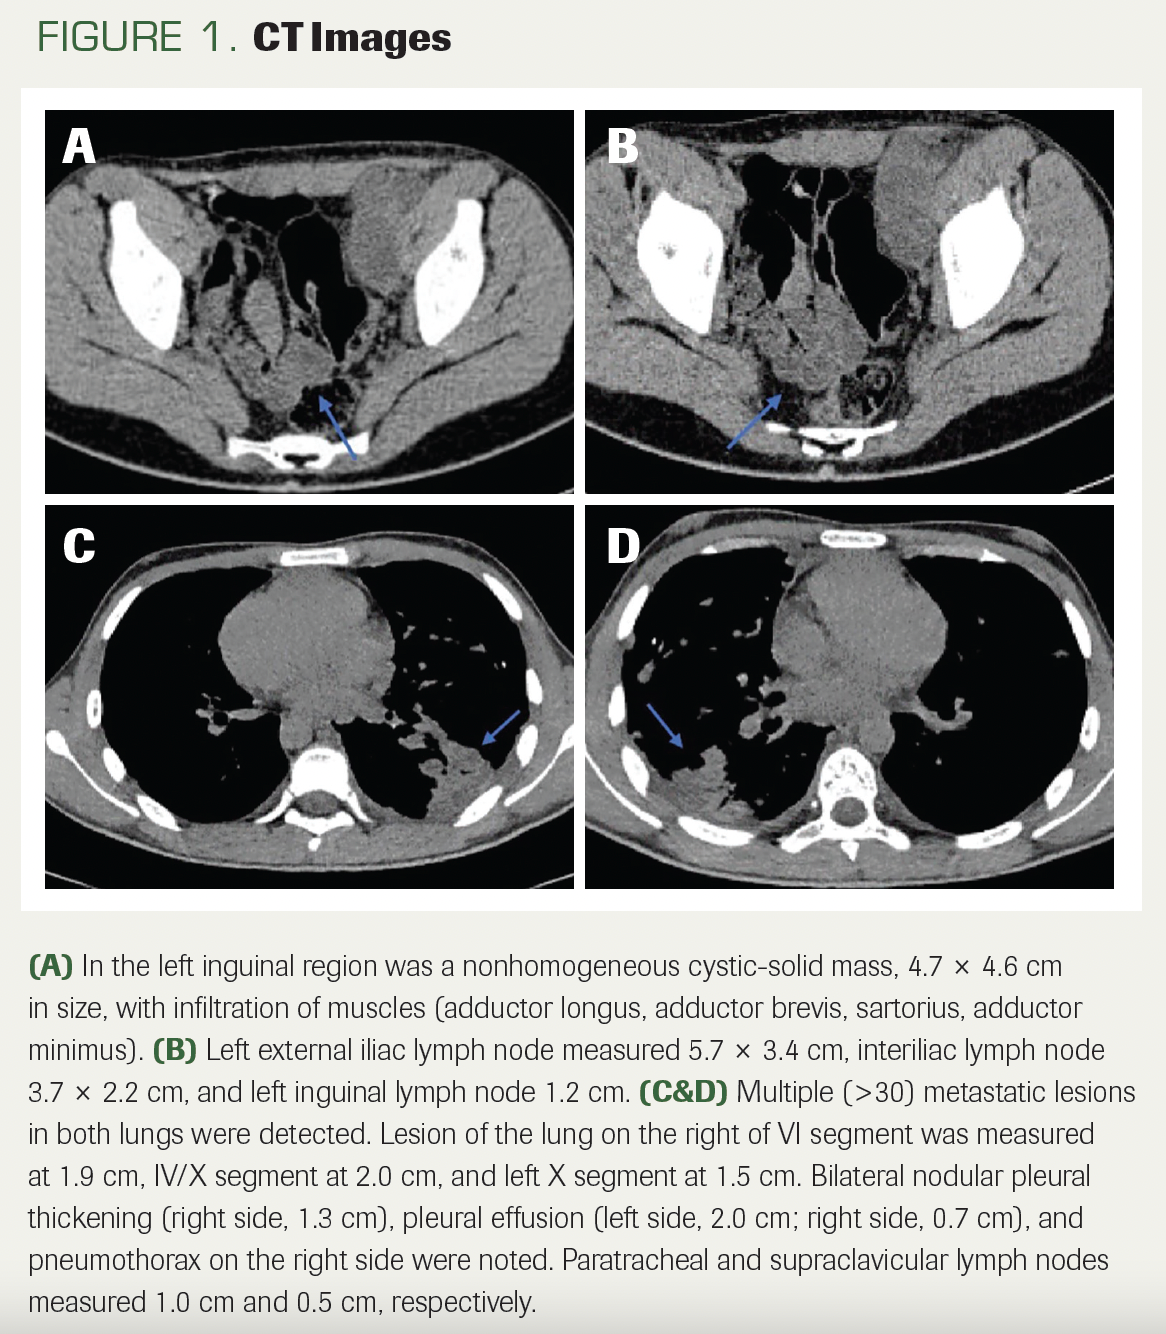 FIGURE 1. CT Images